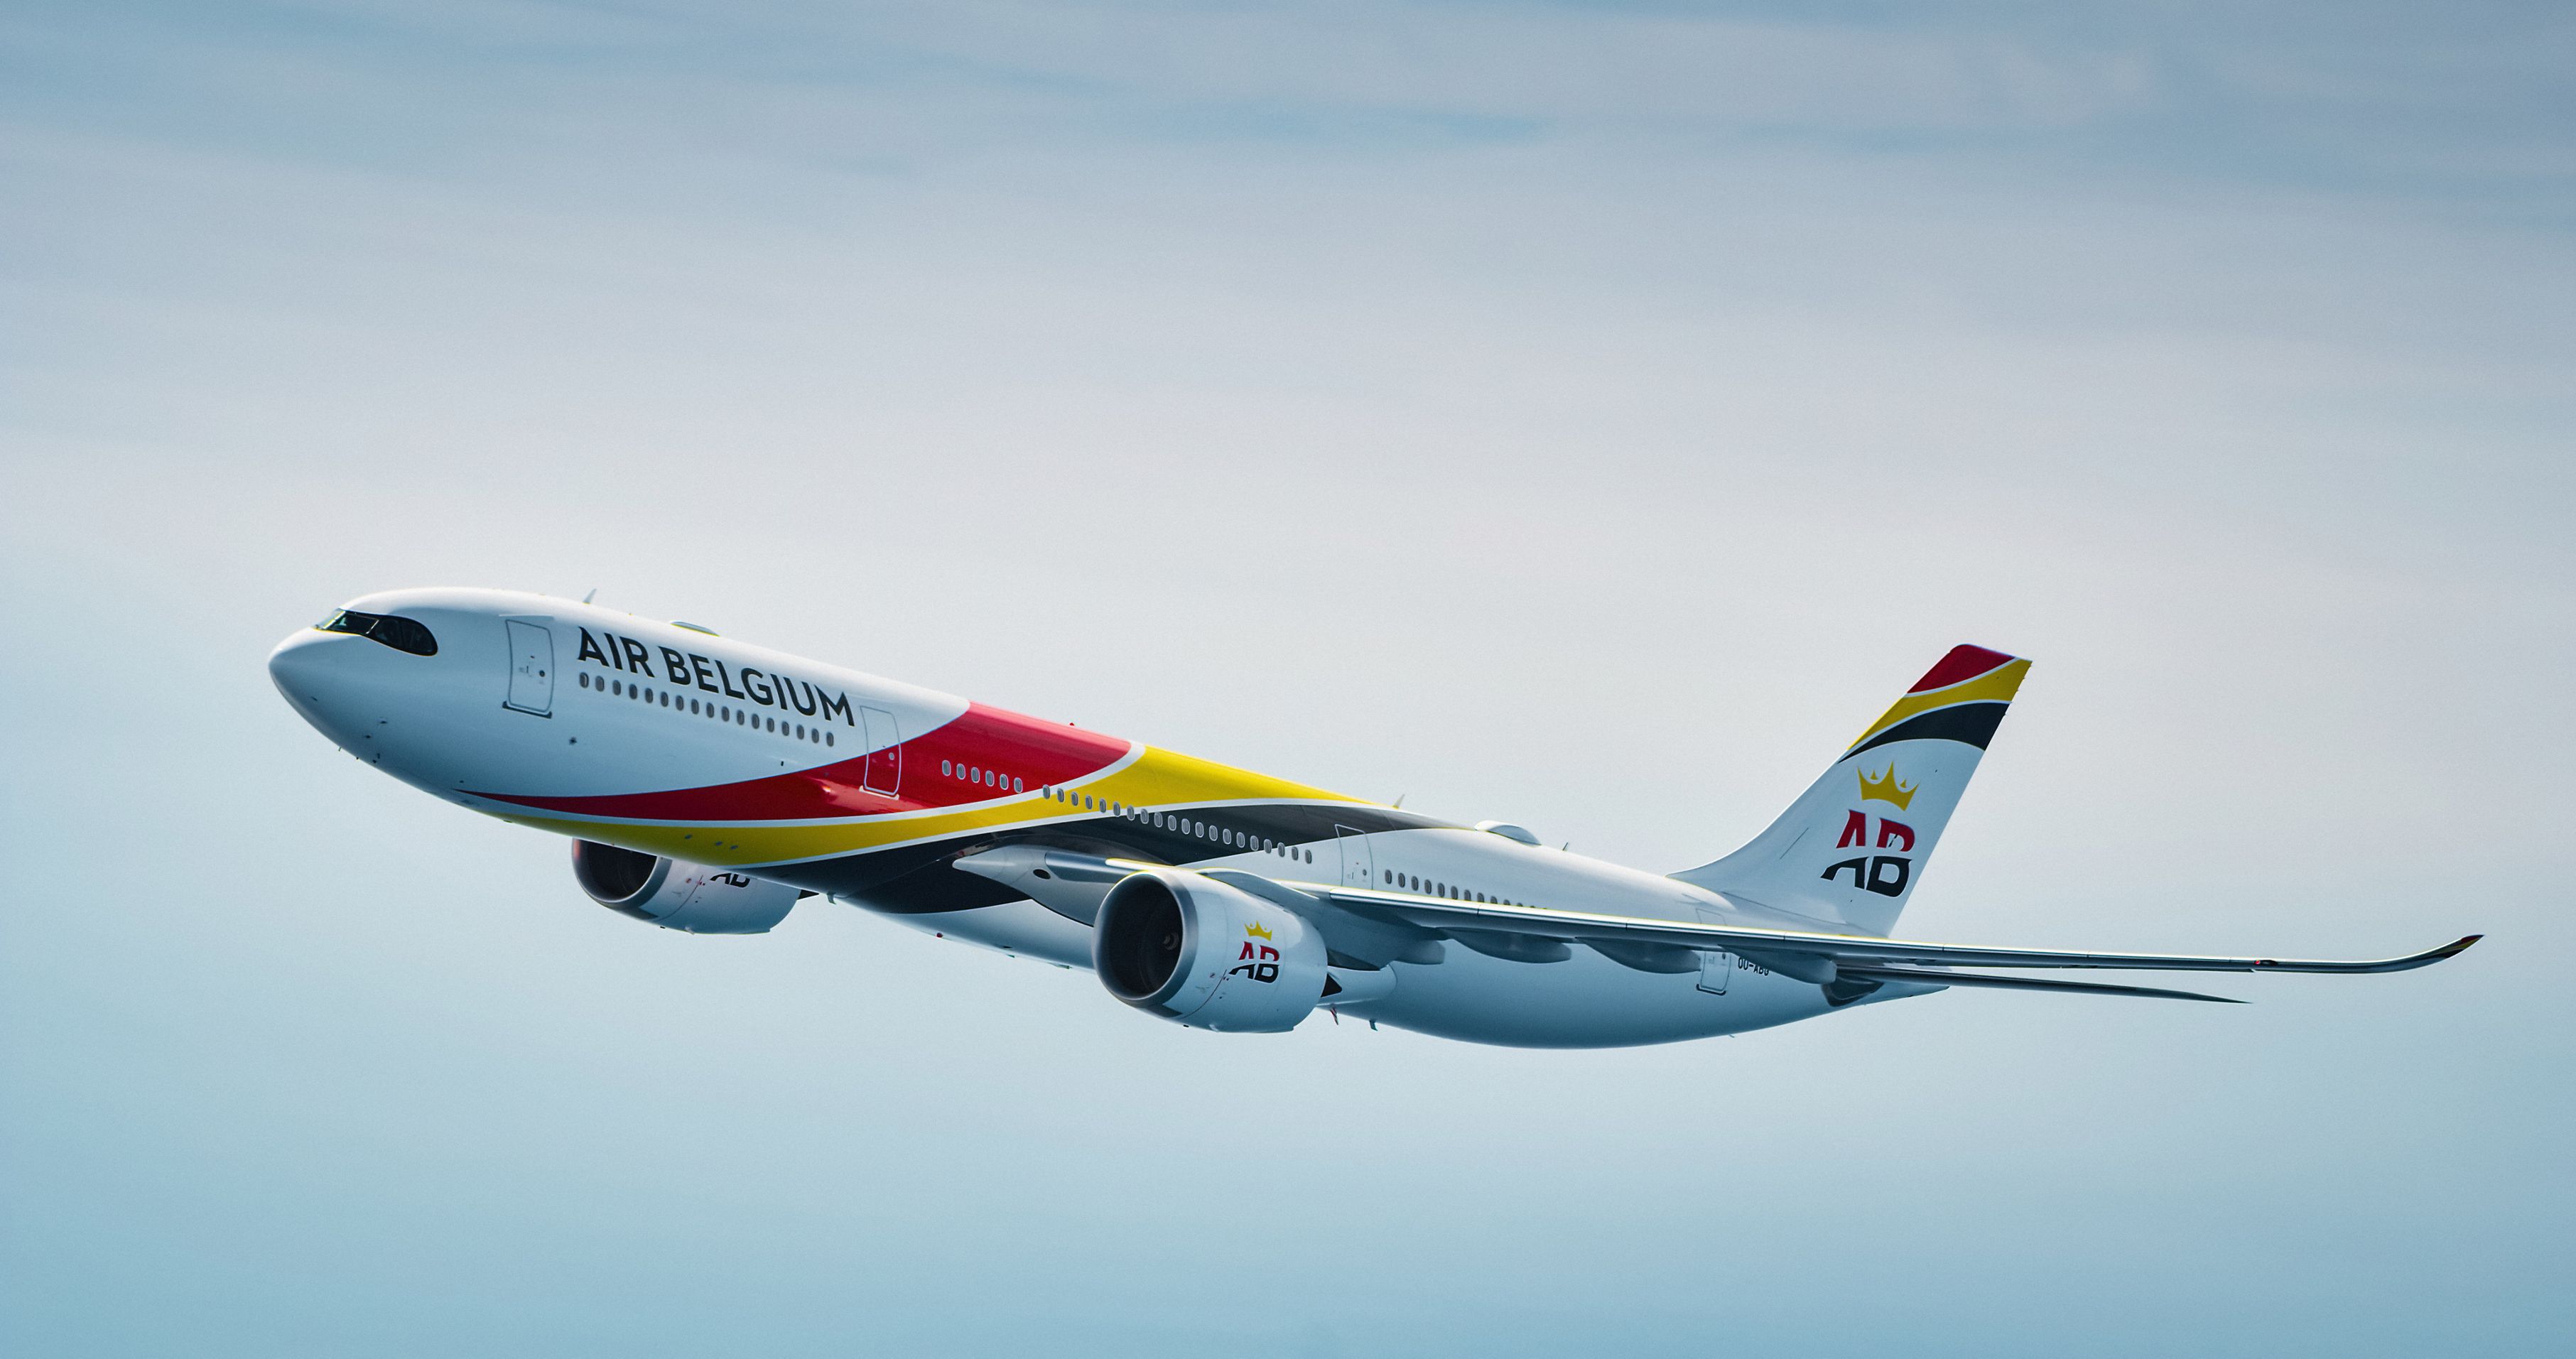 Air Belgium has taken delivery of the first of two A330-900 aircraft from Airbus.